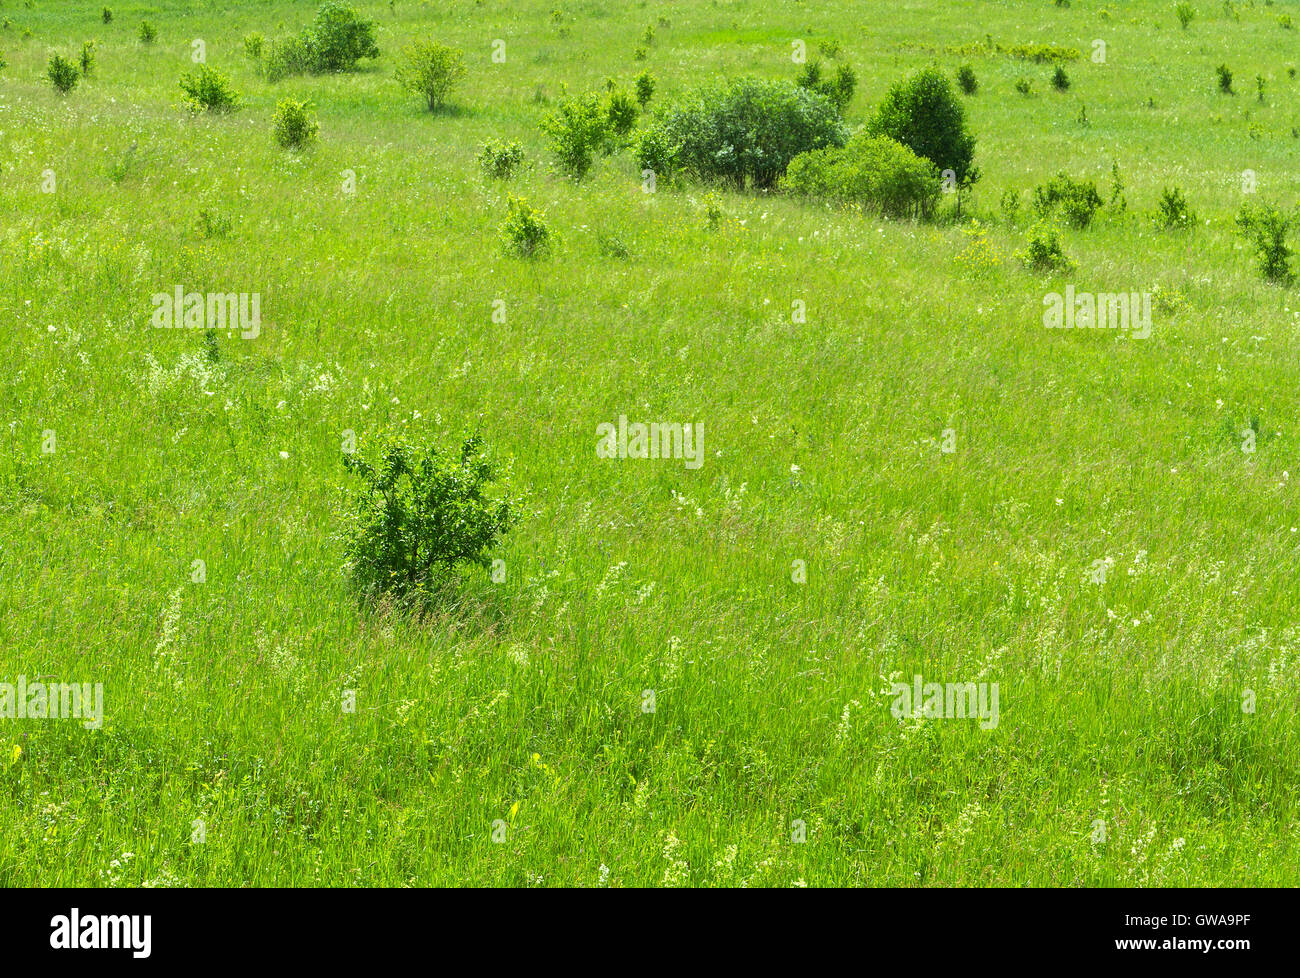 Nature anstract background: green neadow on the hill descent with grass, flowers and other herbs. Stock Photo